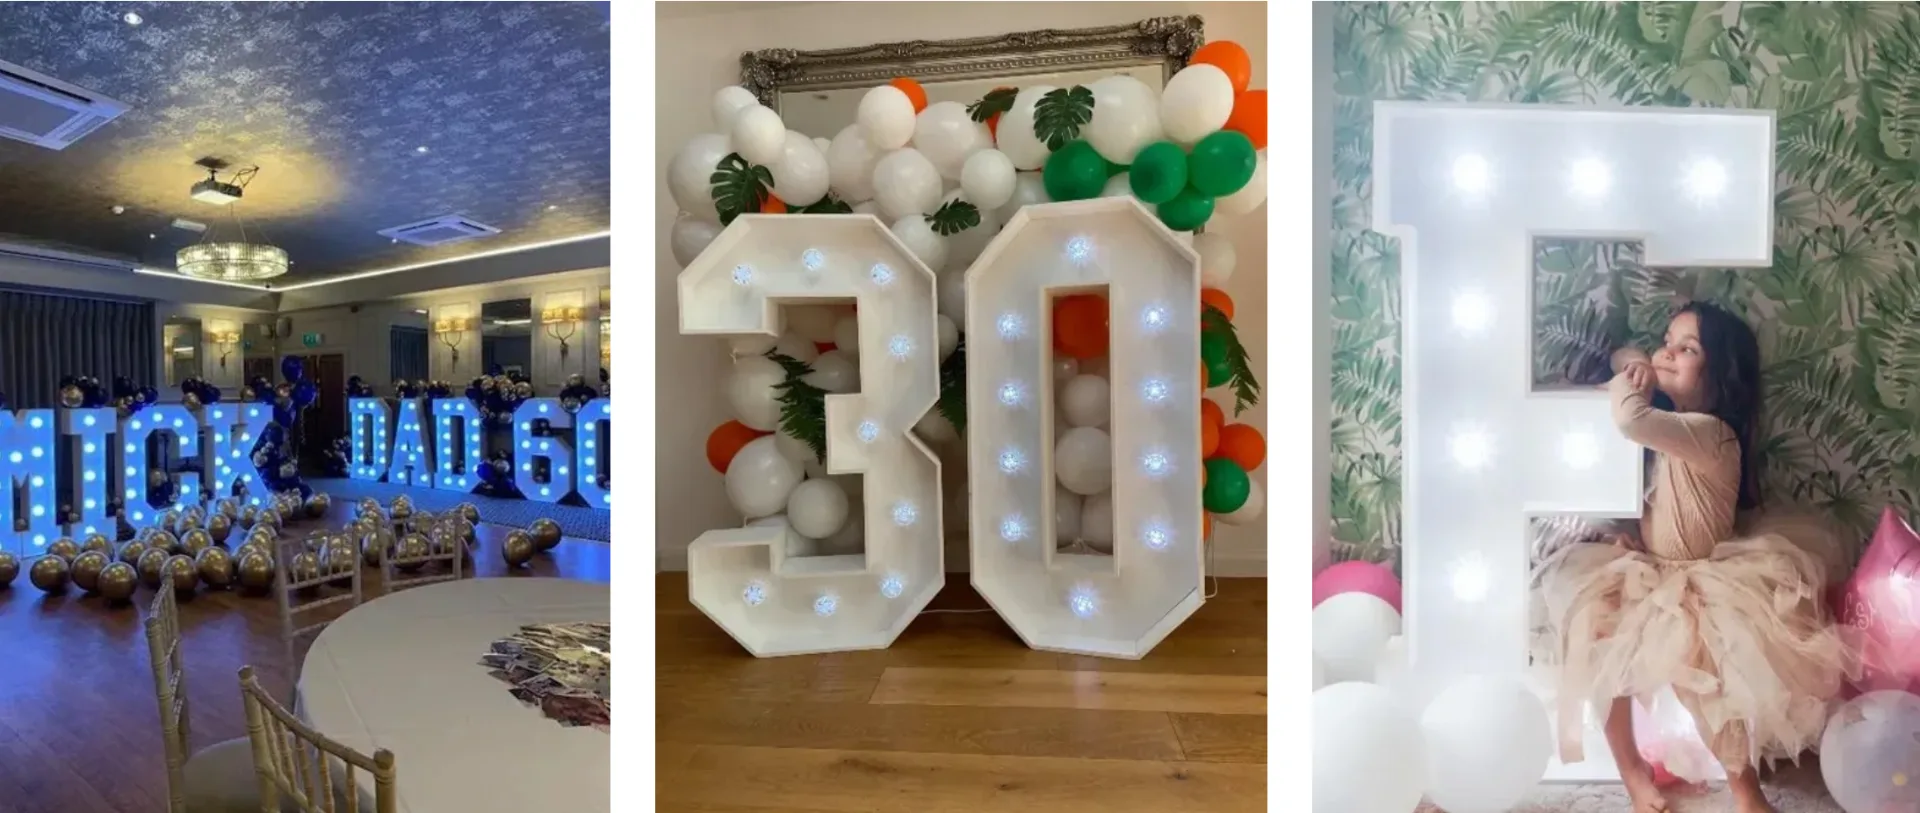 Oliver LED Numbers, Letter Numbers for Hire, Proposal and Engagement LED Letters for Hire, LED Letters for Hire for Events, LED PROM, LED Birthday and Event Letters, Name LEDs, Kids Birthday LED Letters and Numbers for Hire, 30th LED